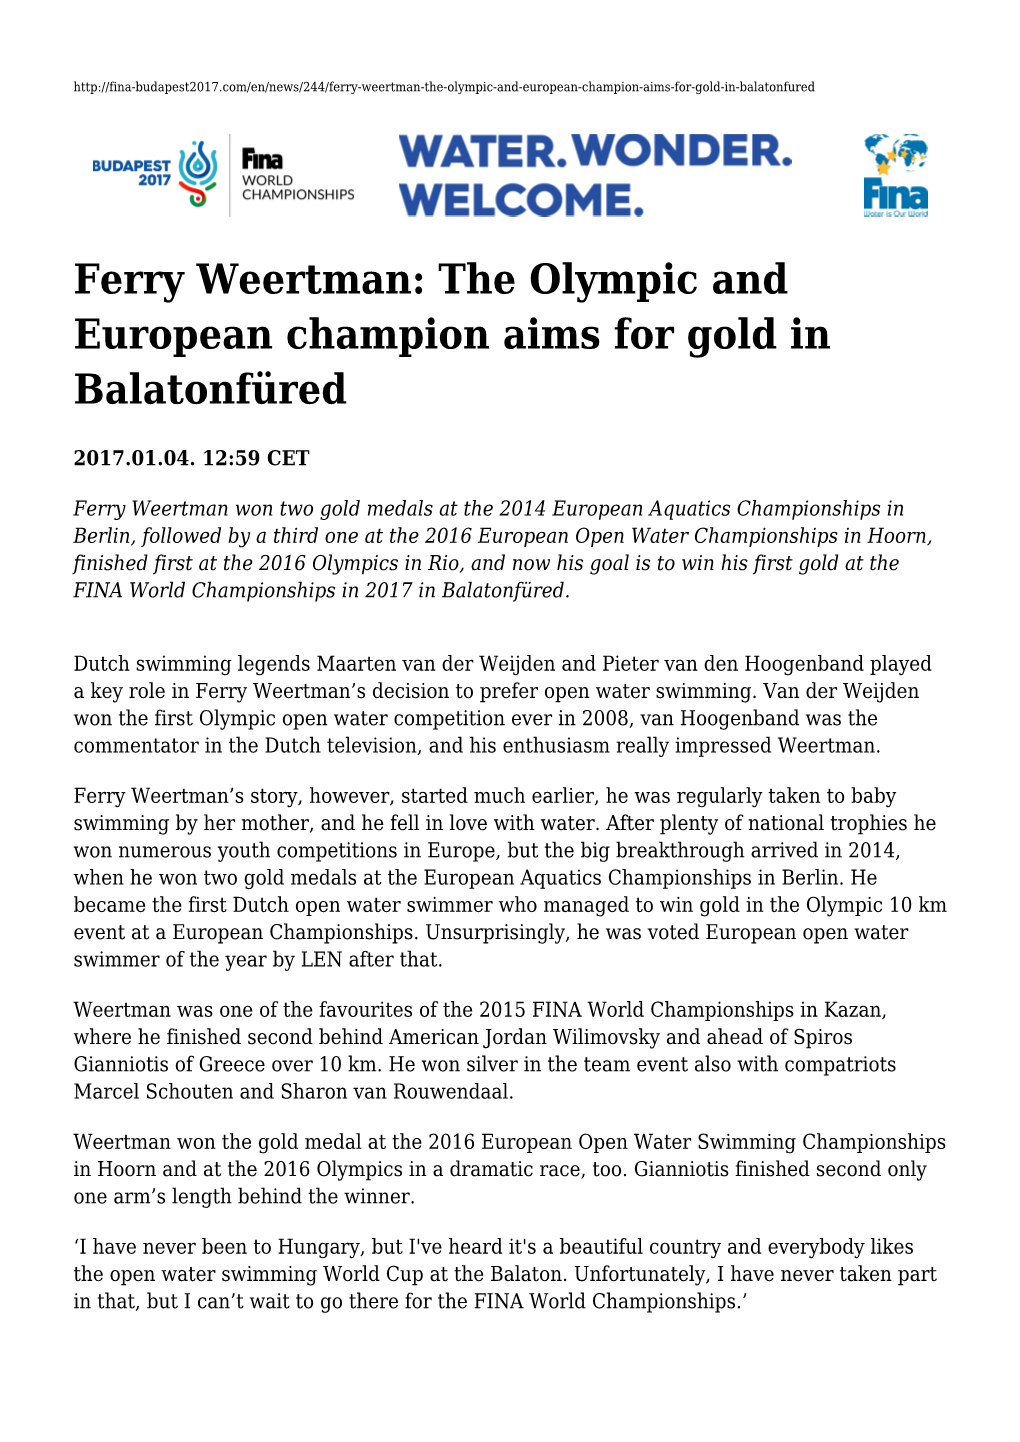 Ferry Weertman: the Olympic and European Champion Aims for Gold in Balatonfüred